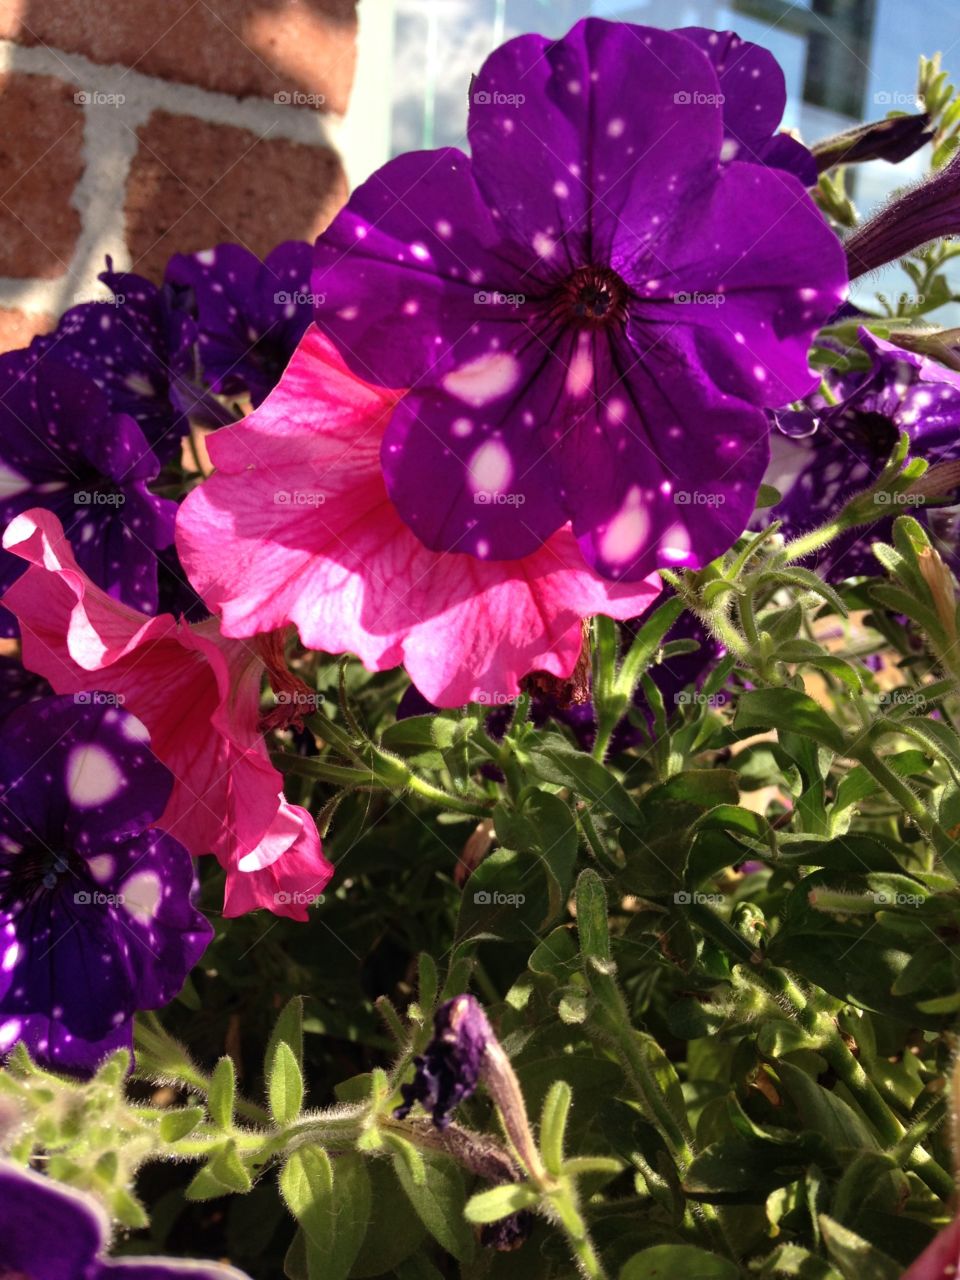 Pink, purple and some white flowers. 